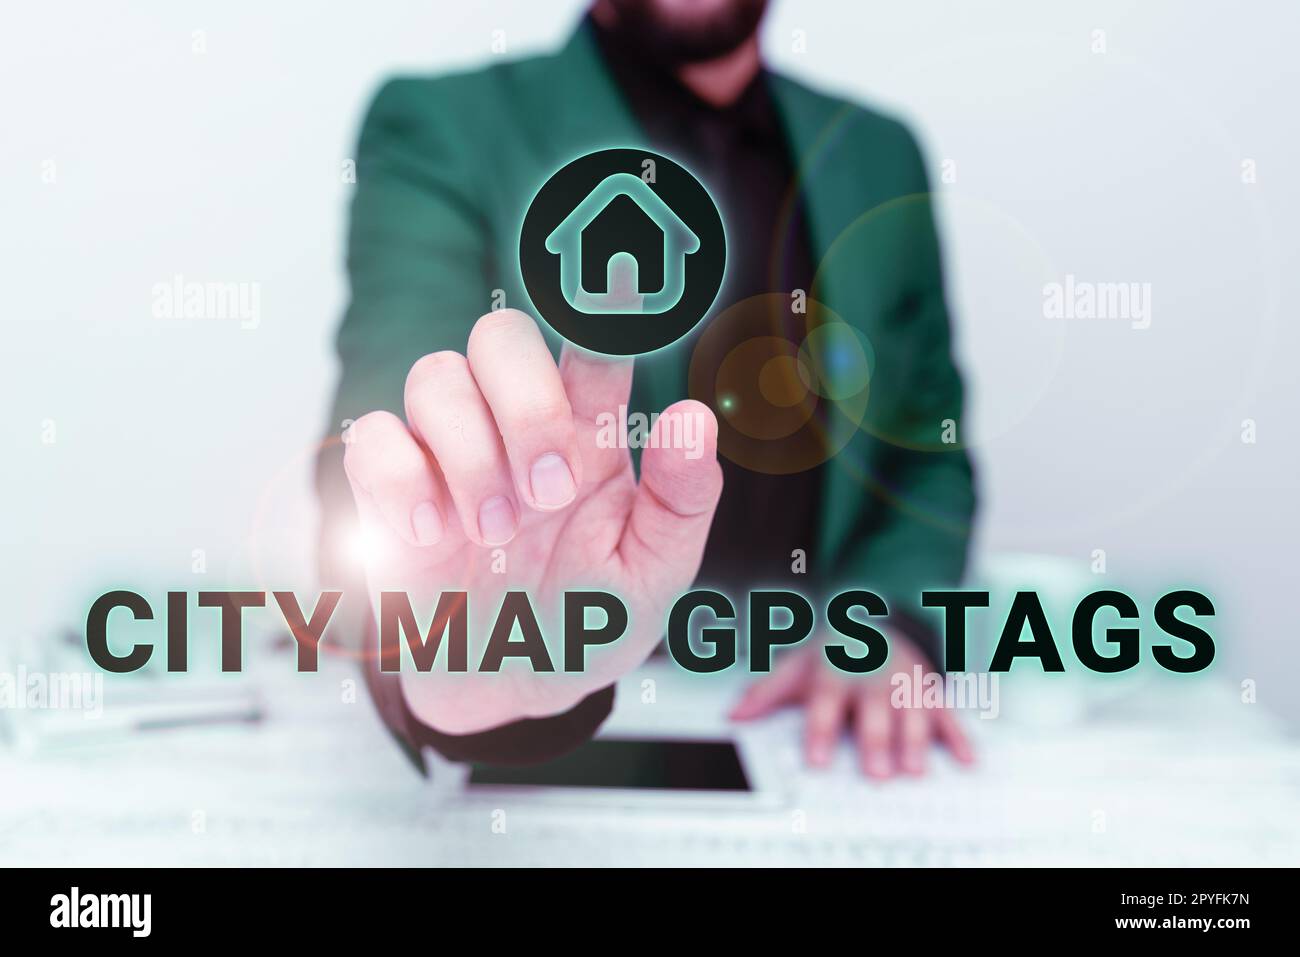 Text showing inspiration City Map Gps Tags. Concept meaning global positioning system location of places in cities Stock Photo